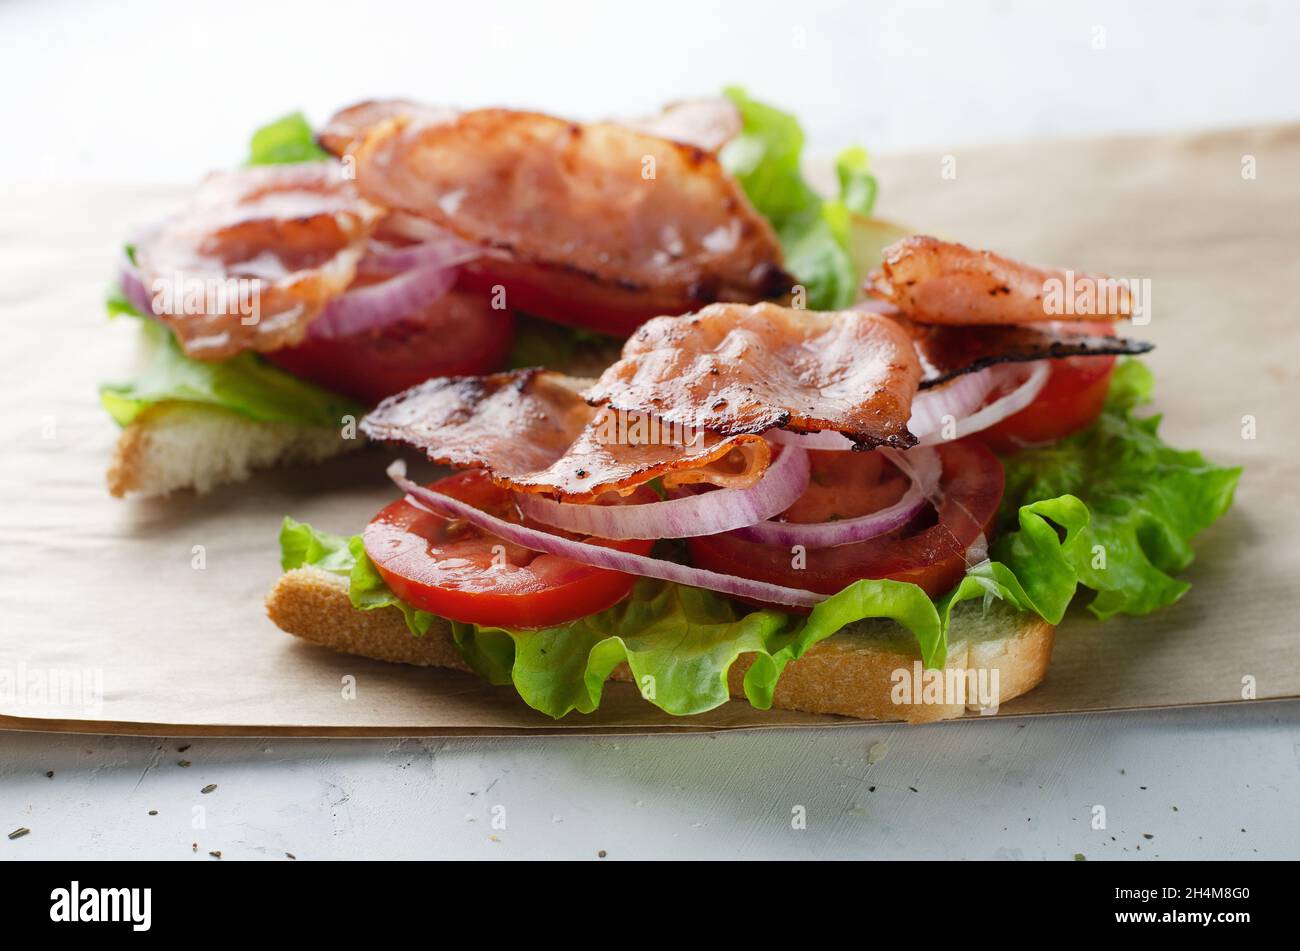 Grilled bacon sandwich on paper with salad, tomato and onion on a white table Stock Photo